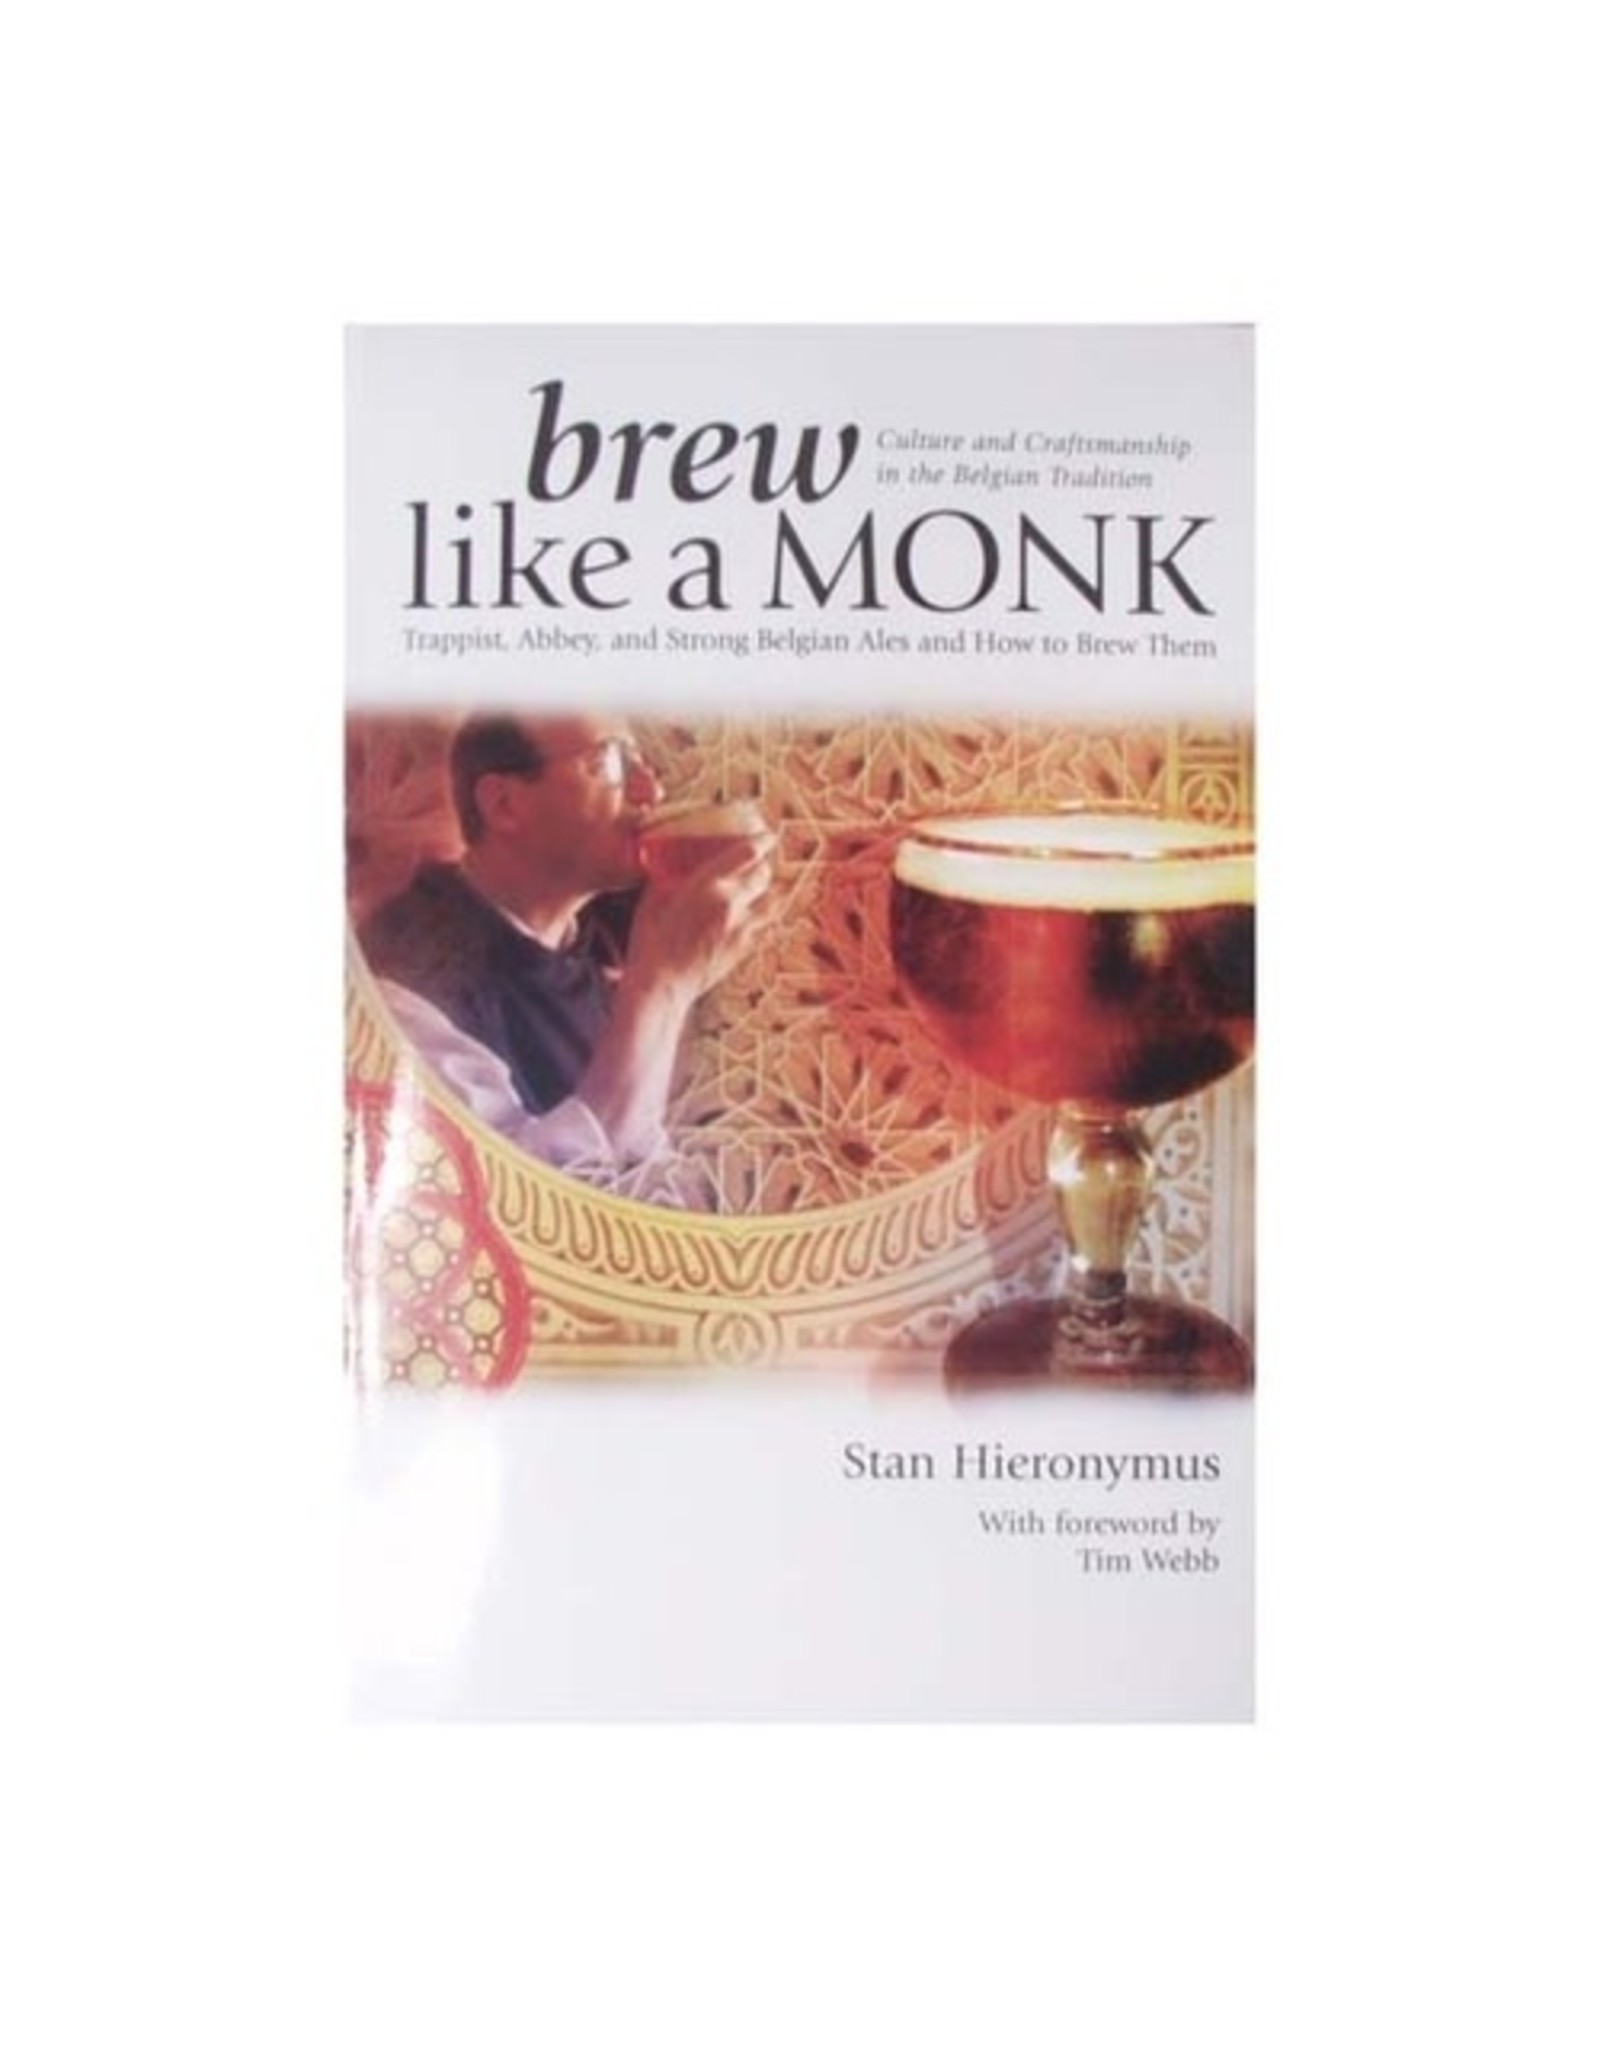 BREW LIKE A MONK  (book)